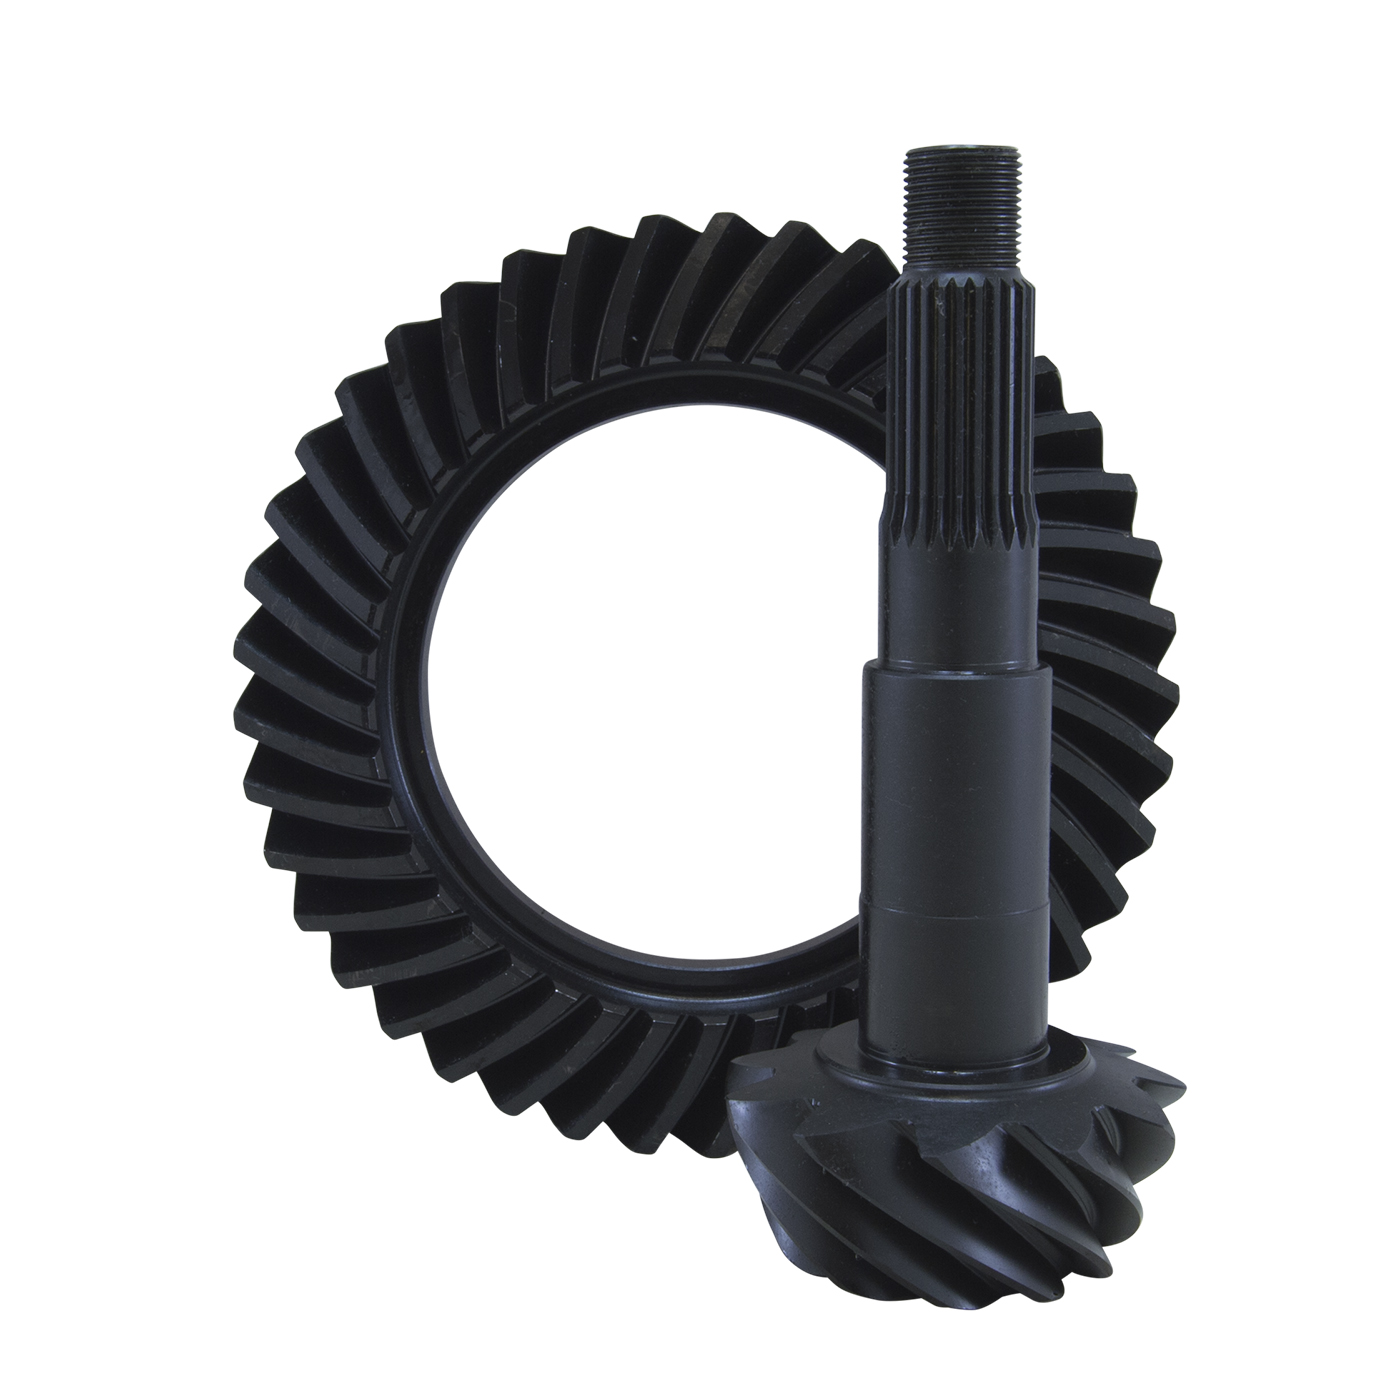 USA Standard Ring & Pinion "thin" gear set for GM 12 bolt car in a 3.73 ratio